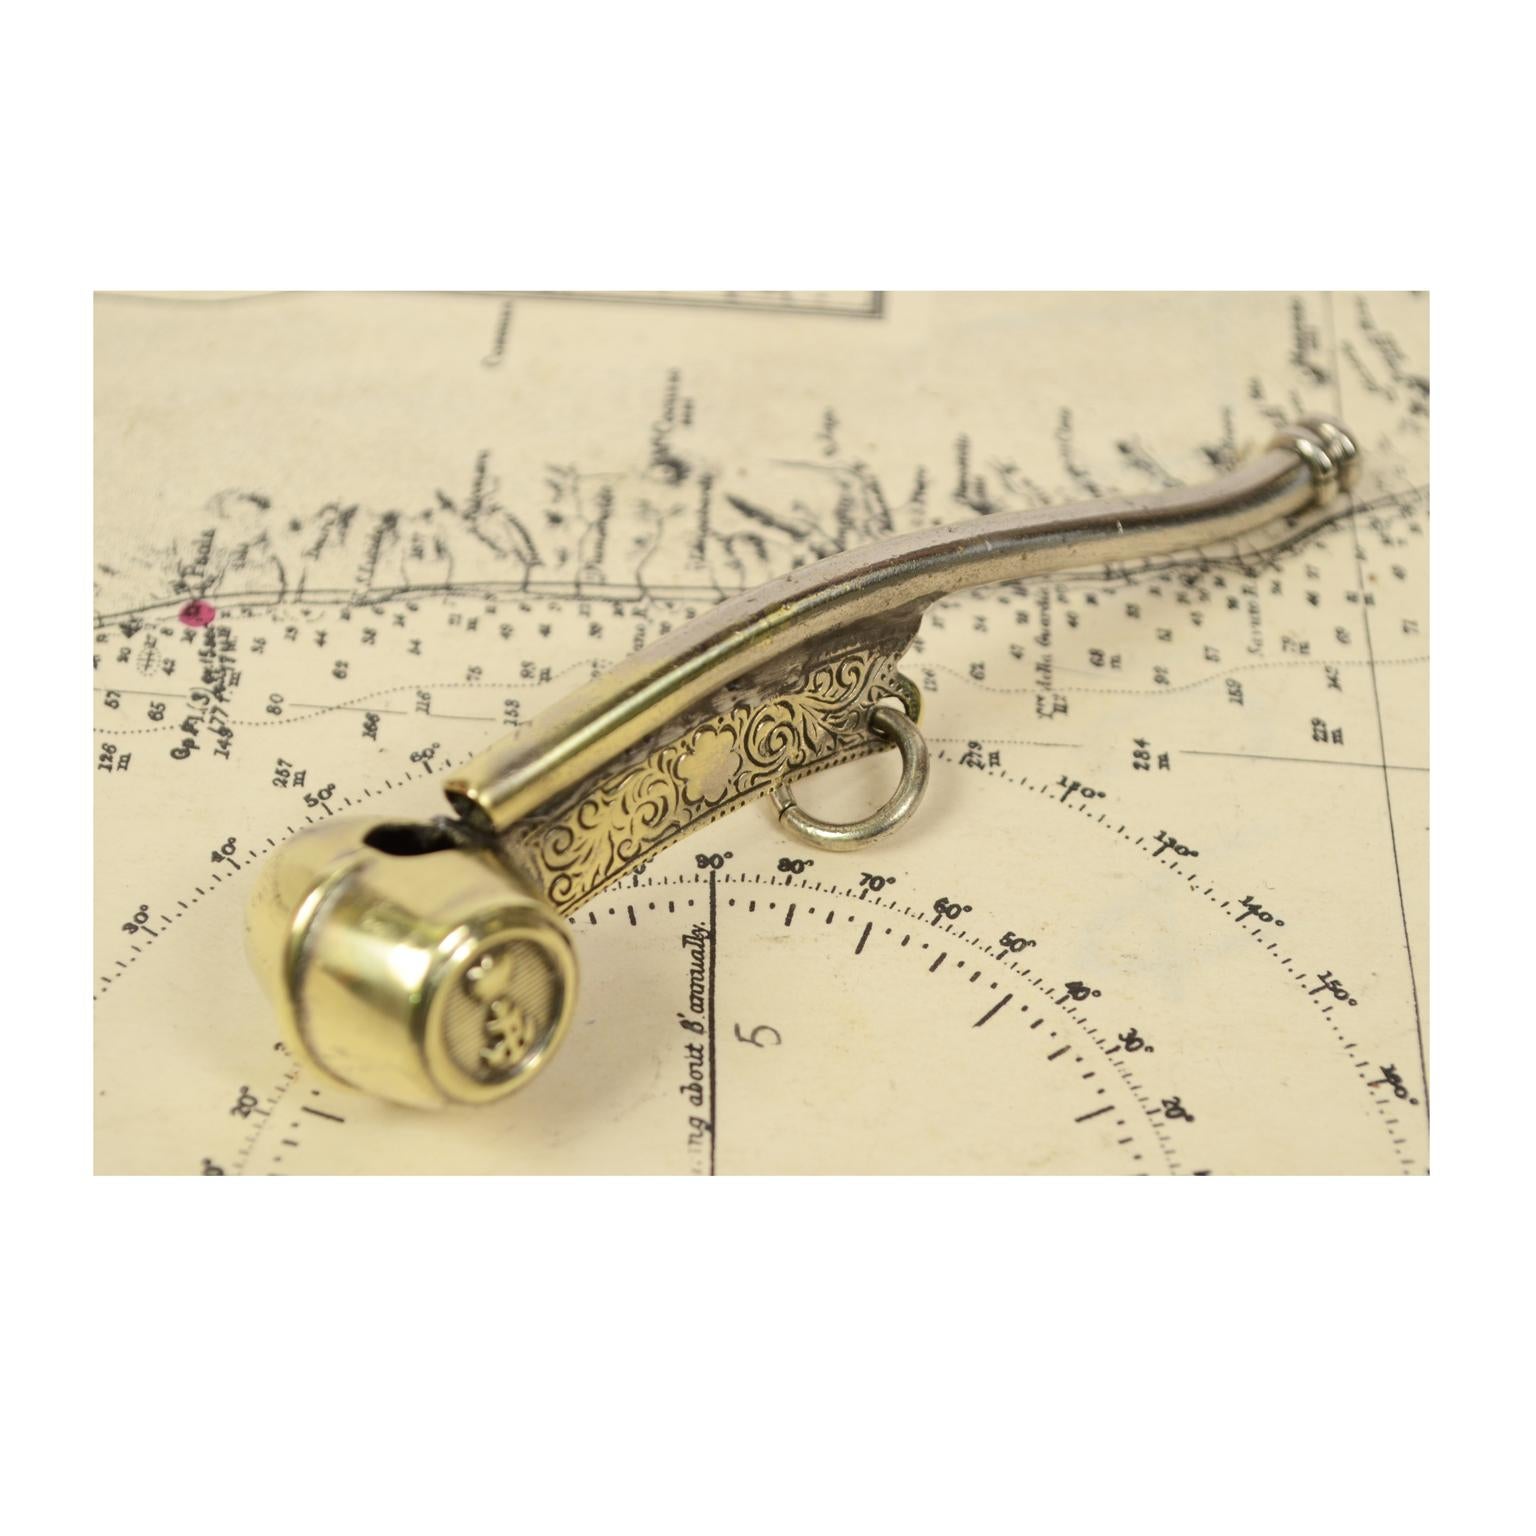 20th Century Boatswain Whistle of Chromed Brass, English Manufacture, Early 1900s